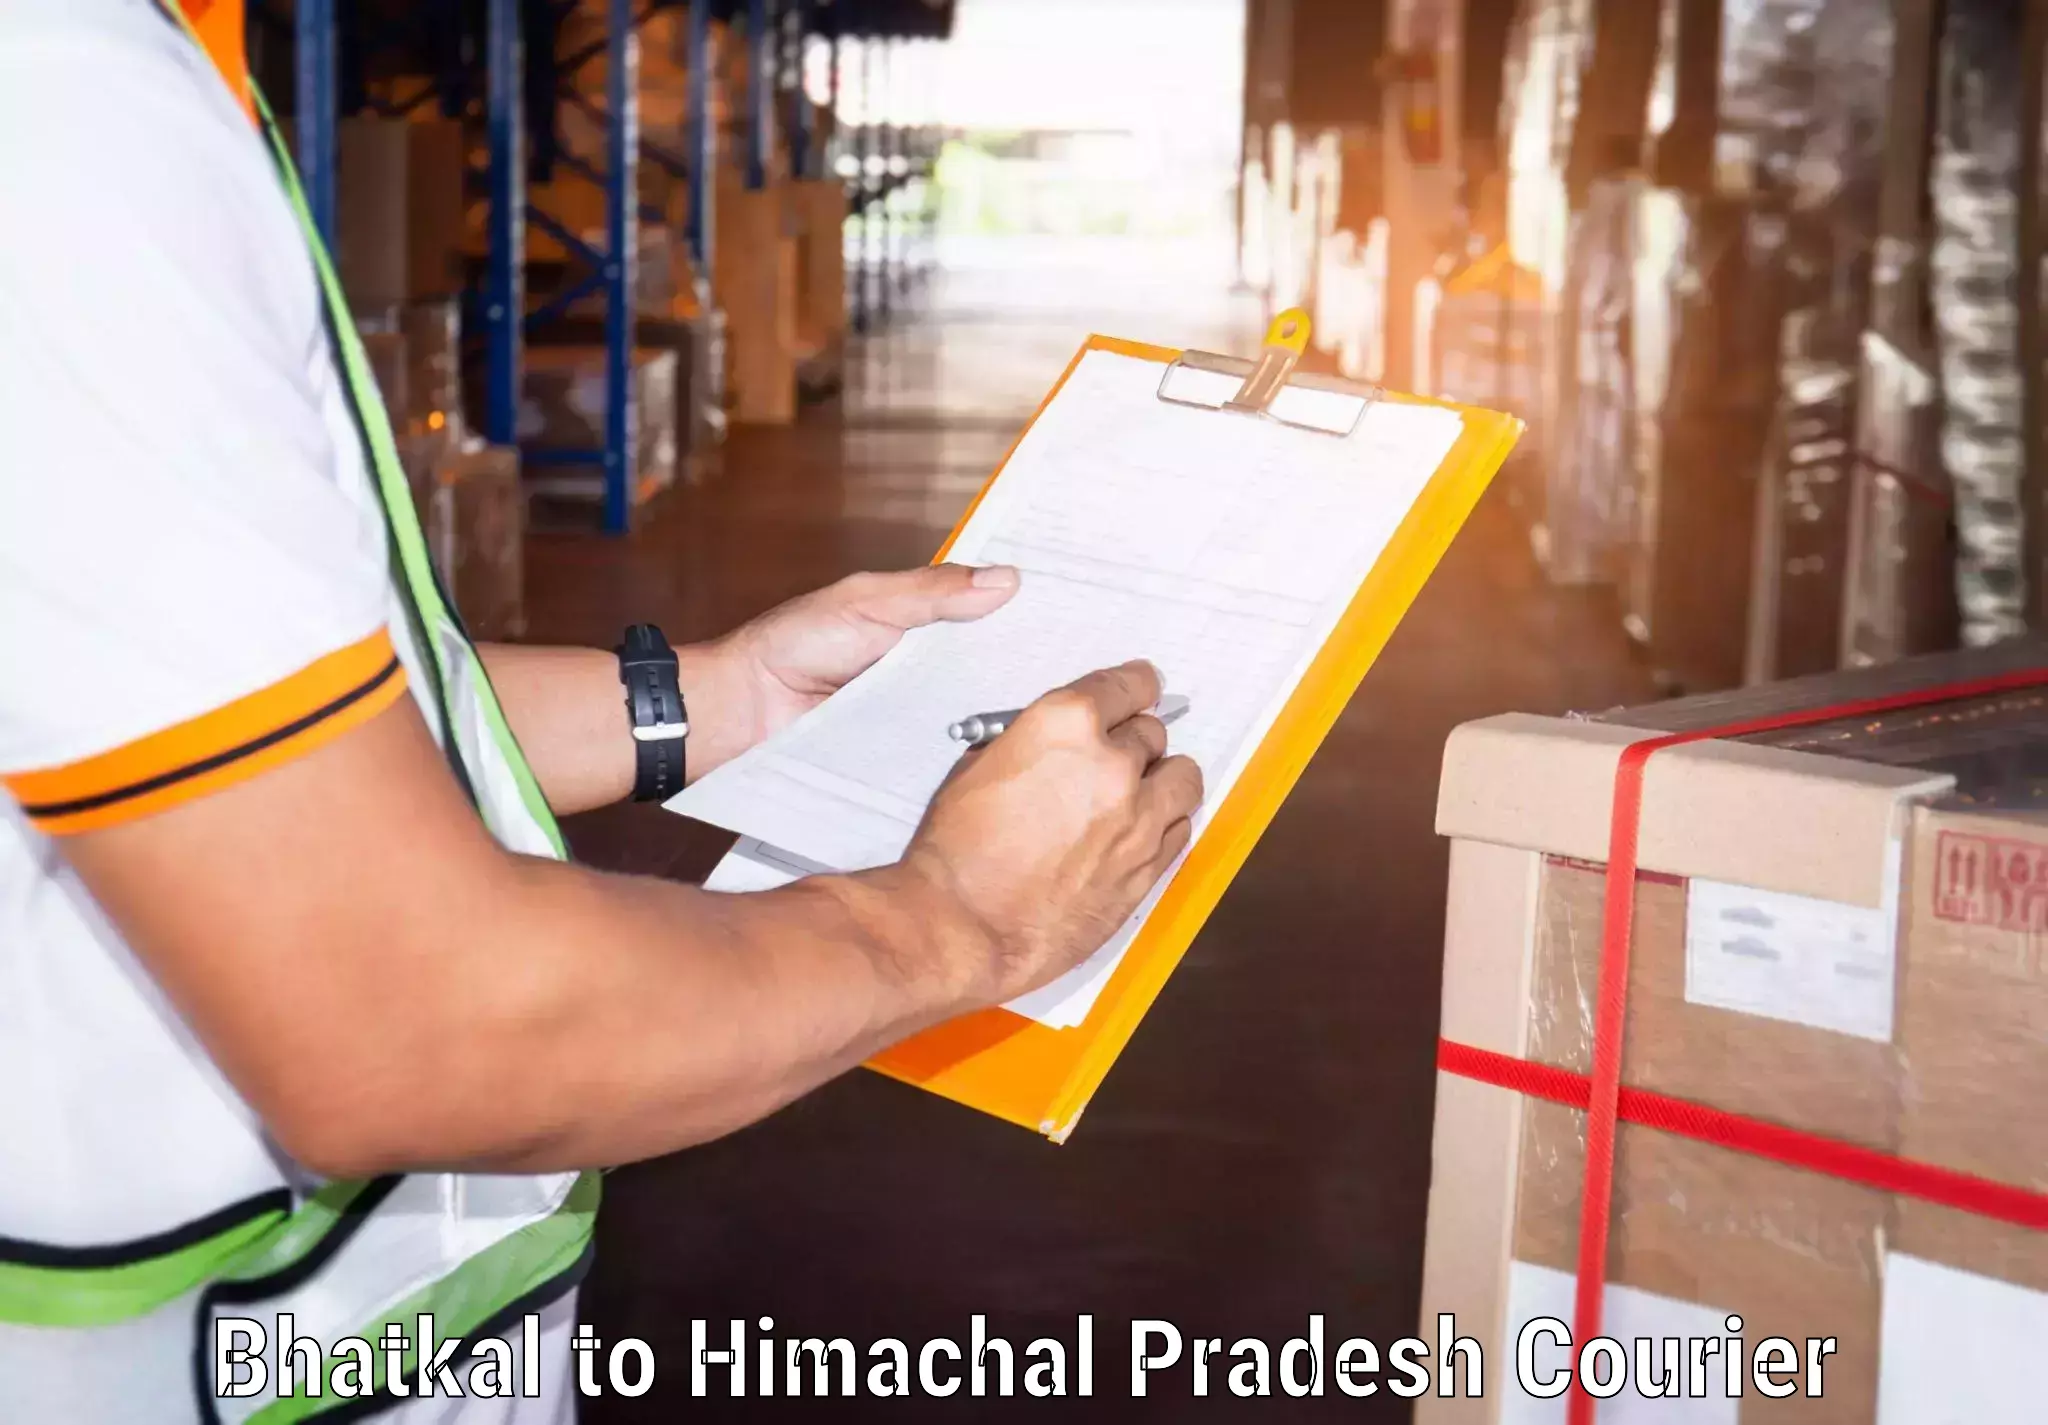 Automated parcel services Bhatkal to Himachal Pradesh